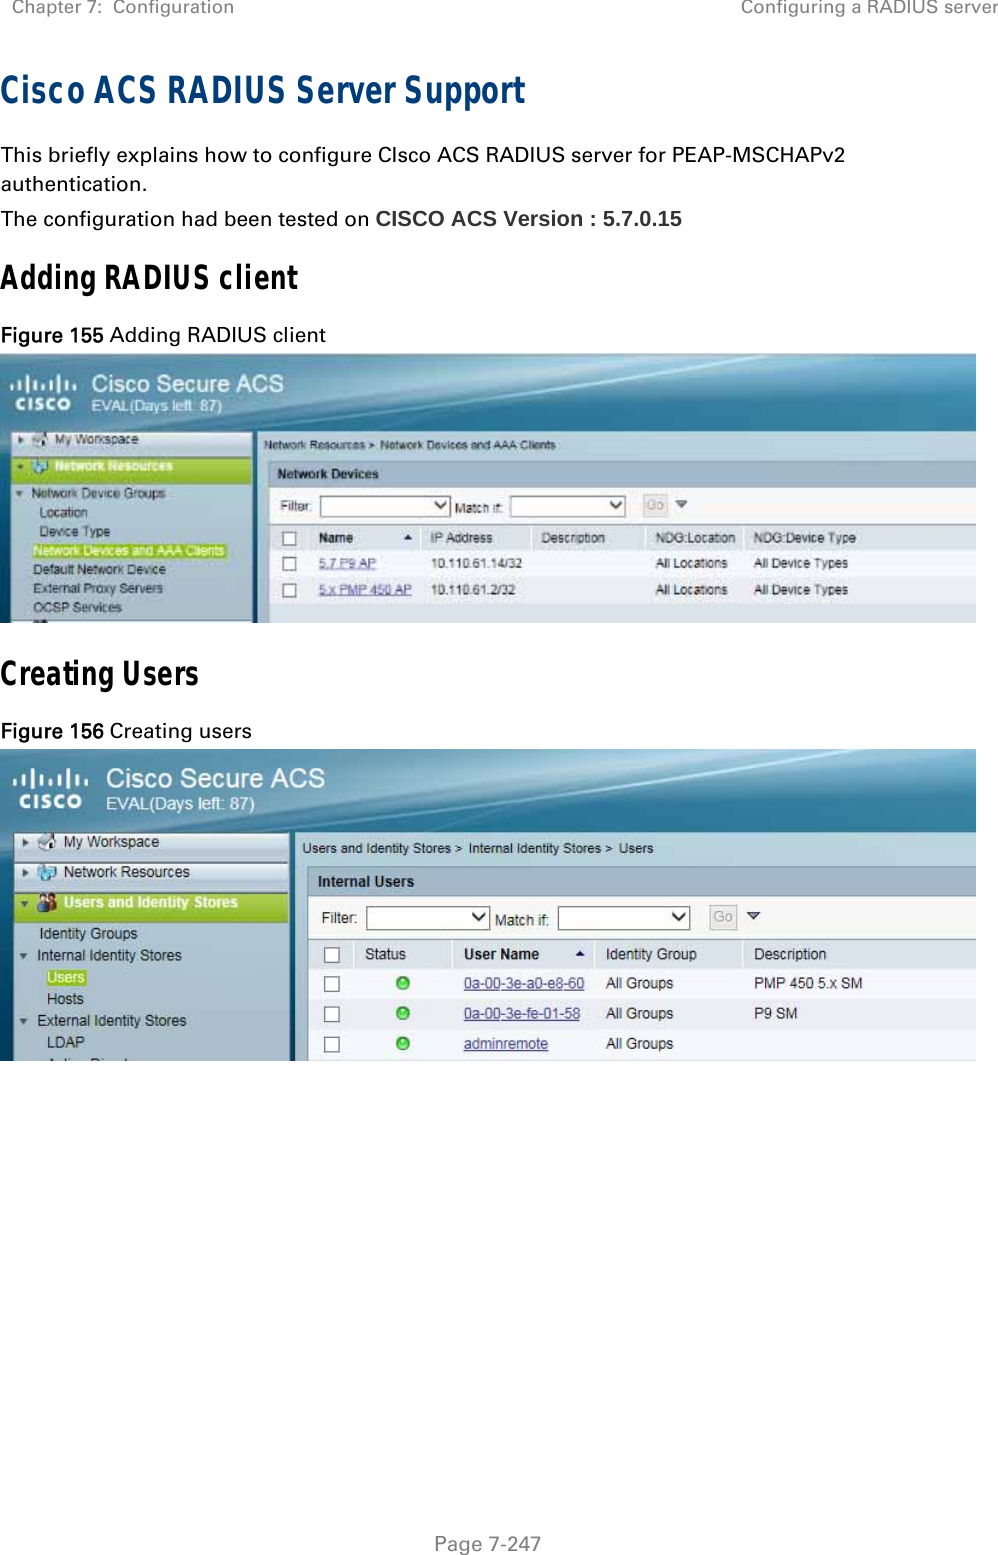 Chapter 7:  Configuration  Configuring a RADIUS server   Page 7-247 Cisco ACS RADIUS Server Support This briefly explains how to configure CIsco ACS RADIUS server for PEAP-MSCHAPv2 authentication. The configuration had been tested on CISCO ACS Version : 5.7.0.15 Adding RADIUS client Figure 155 Adding RADIUS client  Creating Users Figure 156 Creating users    